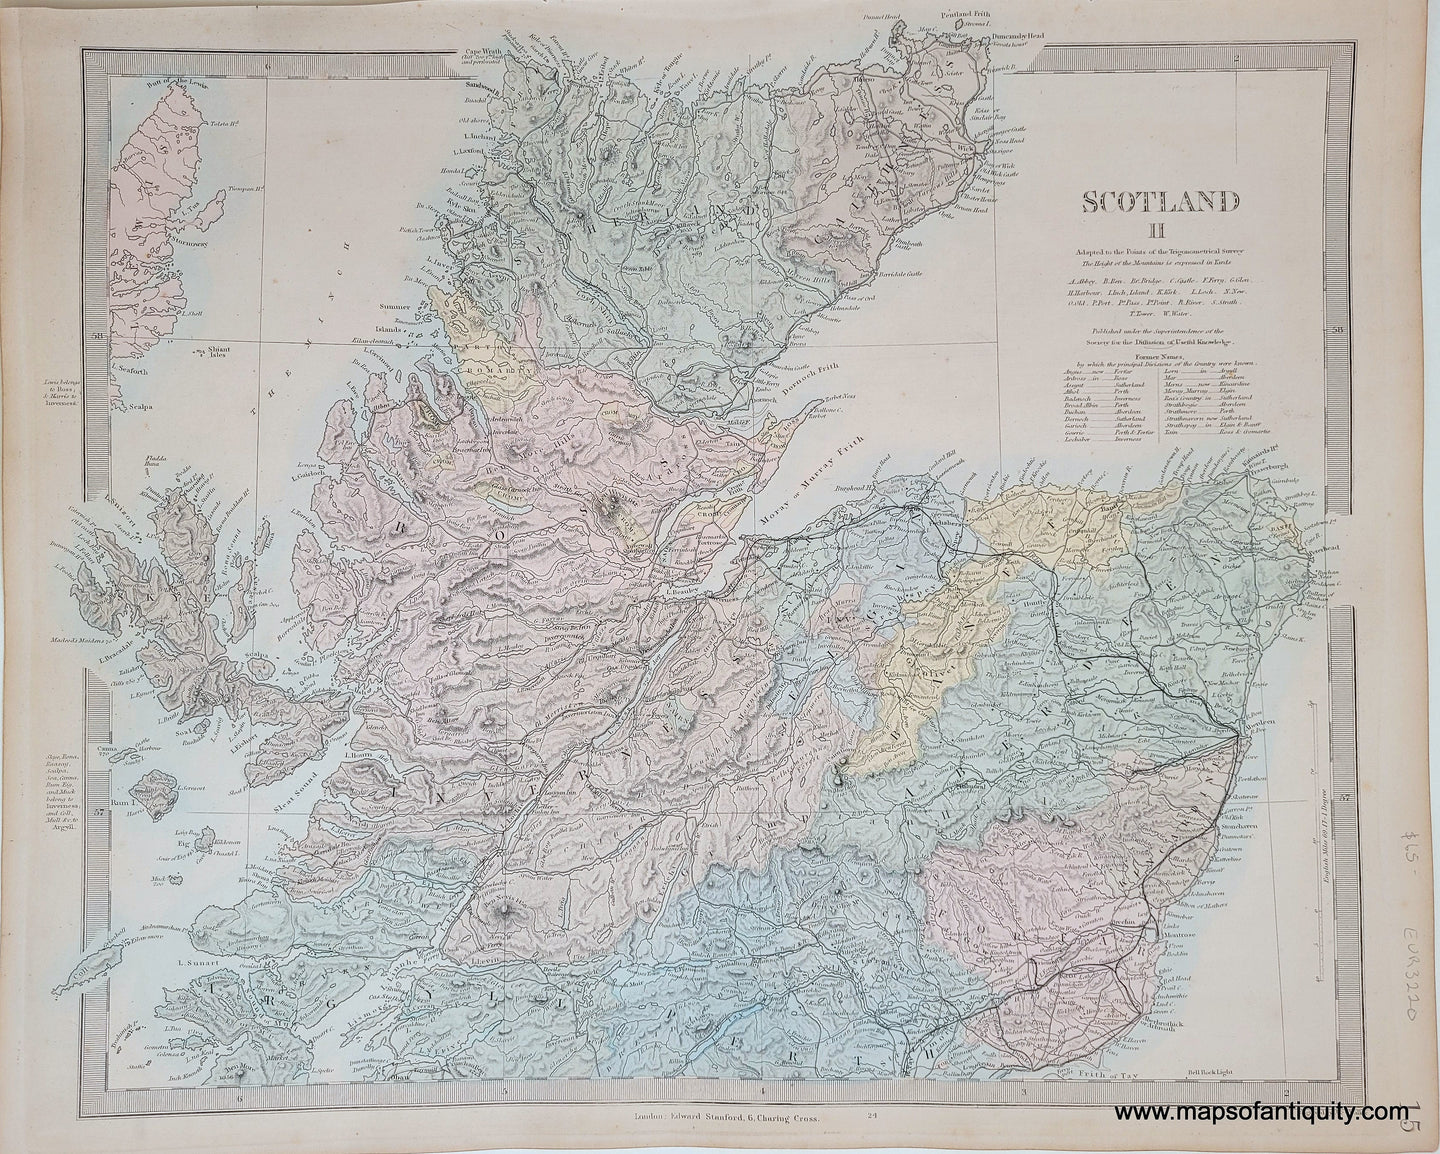 Genuine-Antique-Map-Scotland-II-Scotland--1860-SDUK-Society-for-the-Diffusion-of-Useful-Knowledge-Maps-Of-Antiquity-1800s-19th-century